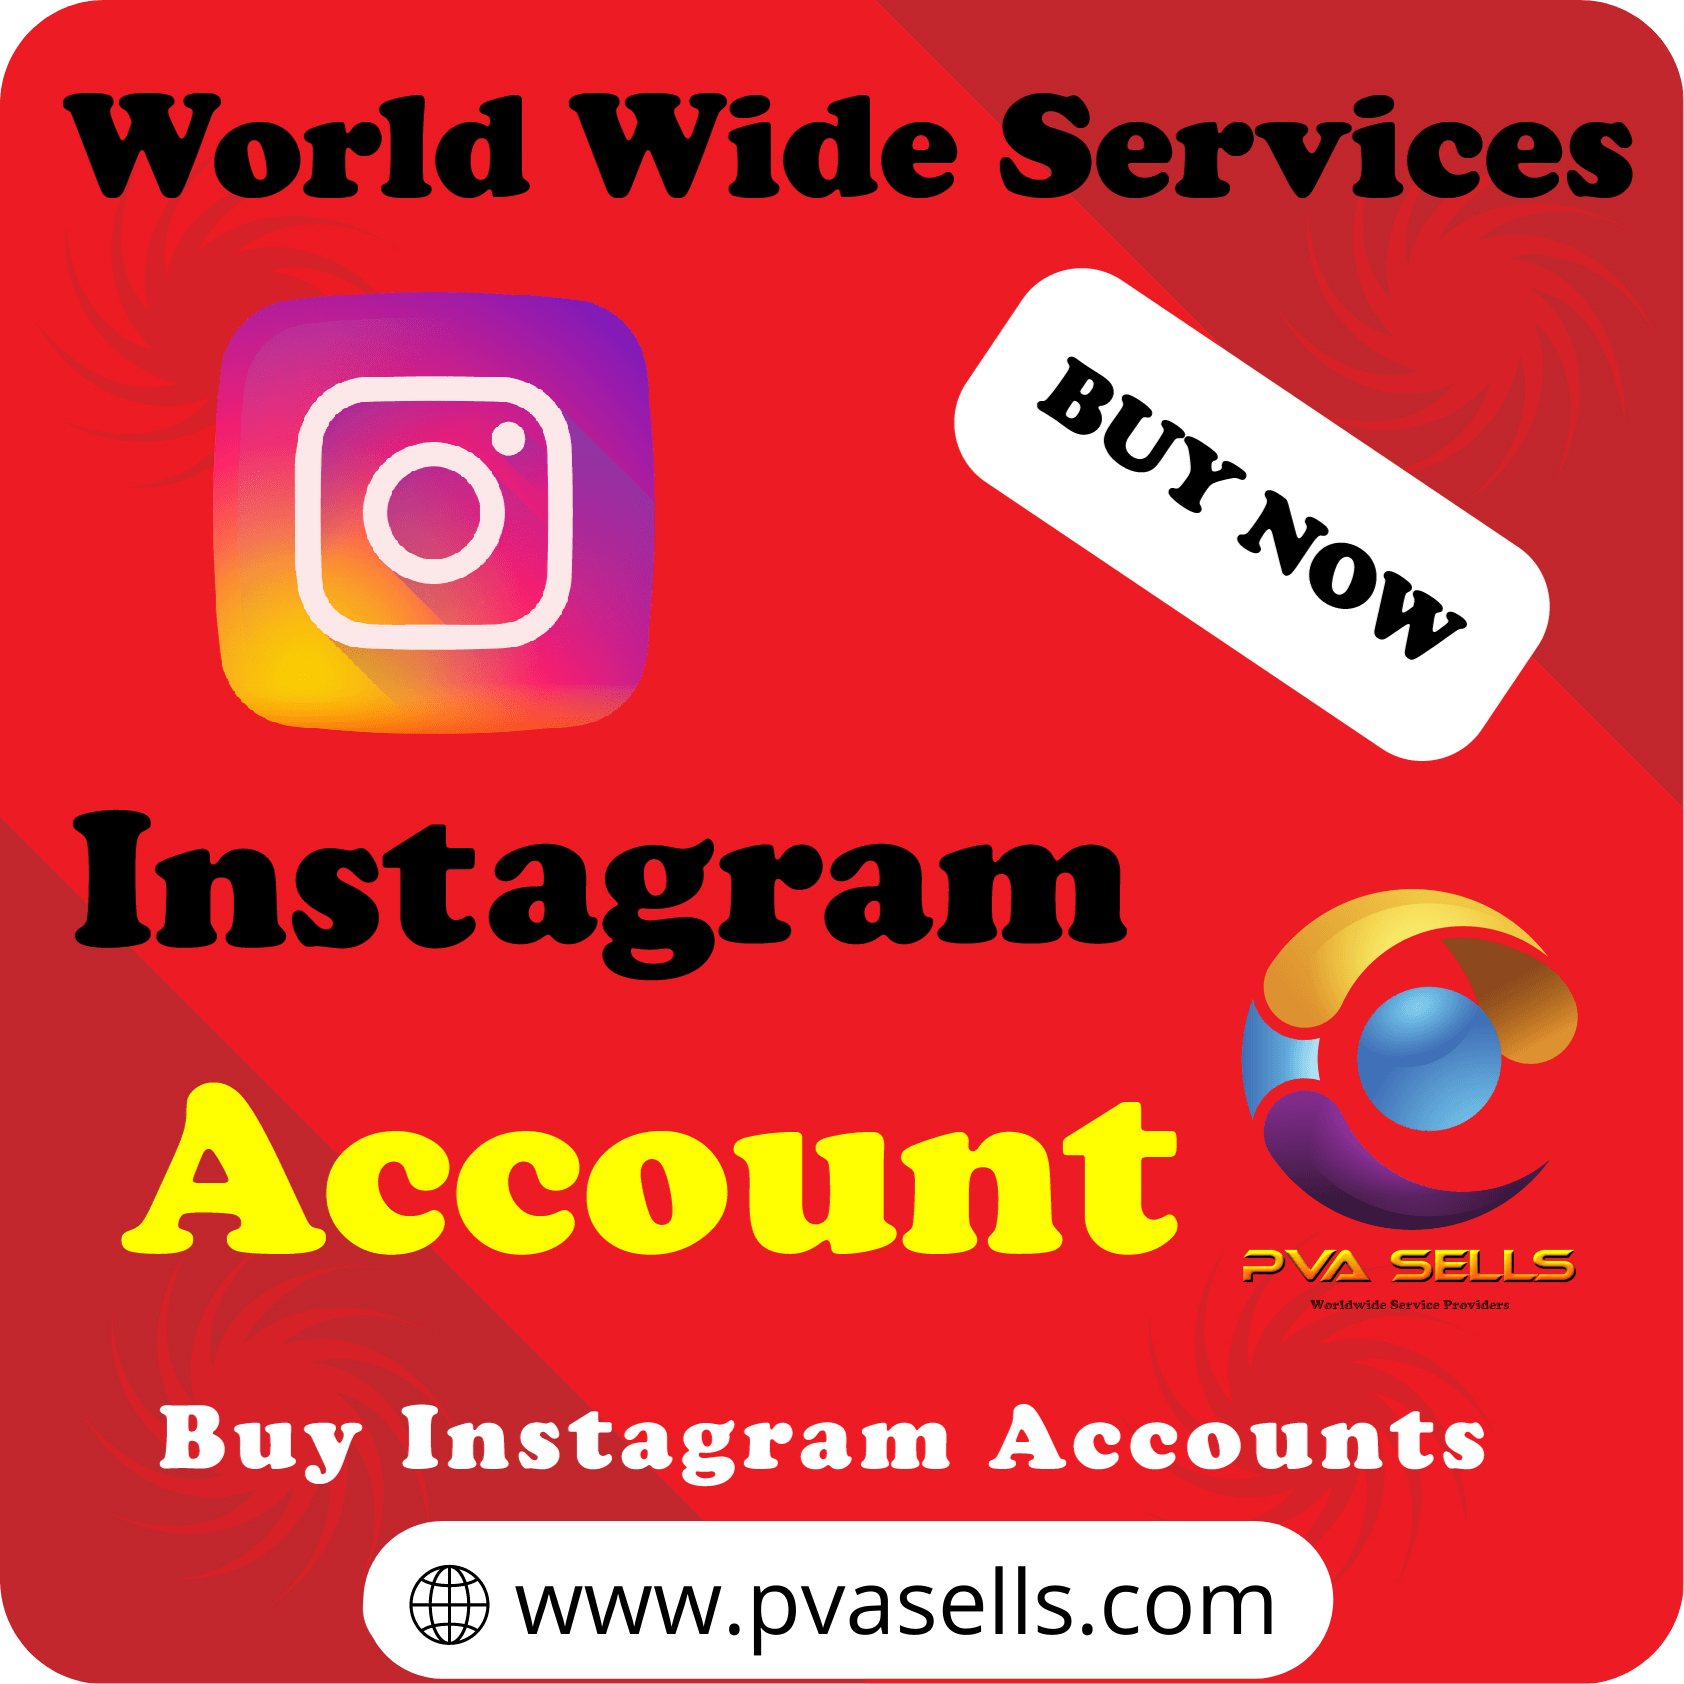 Buy Instagram Accounts - 100% Real, Aged, Cheap & Verified...